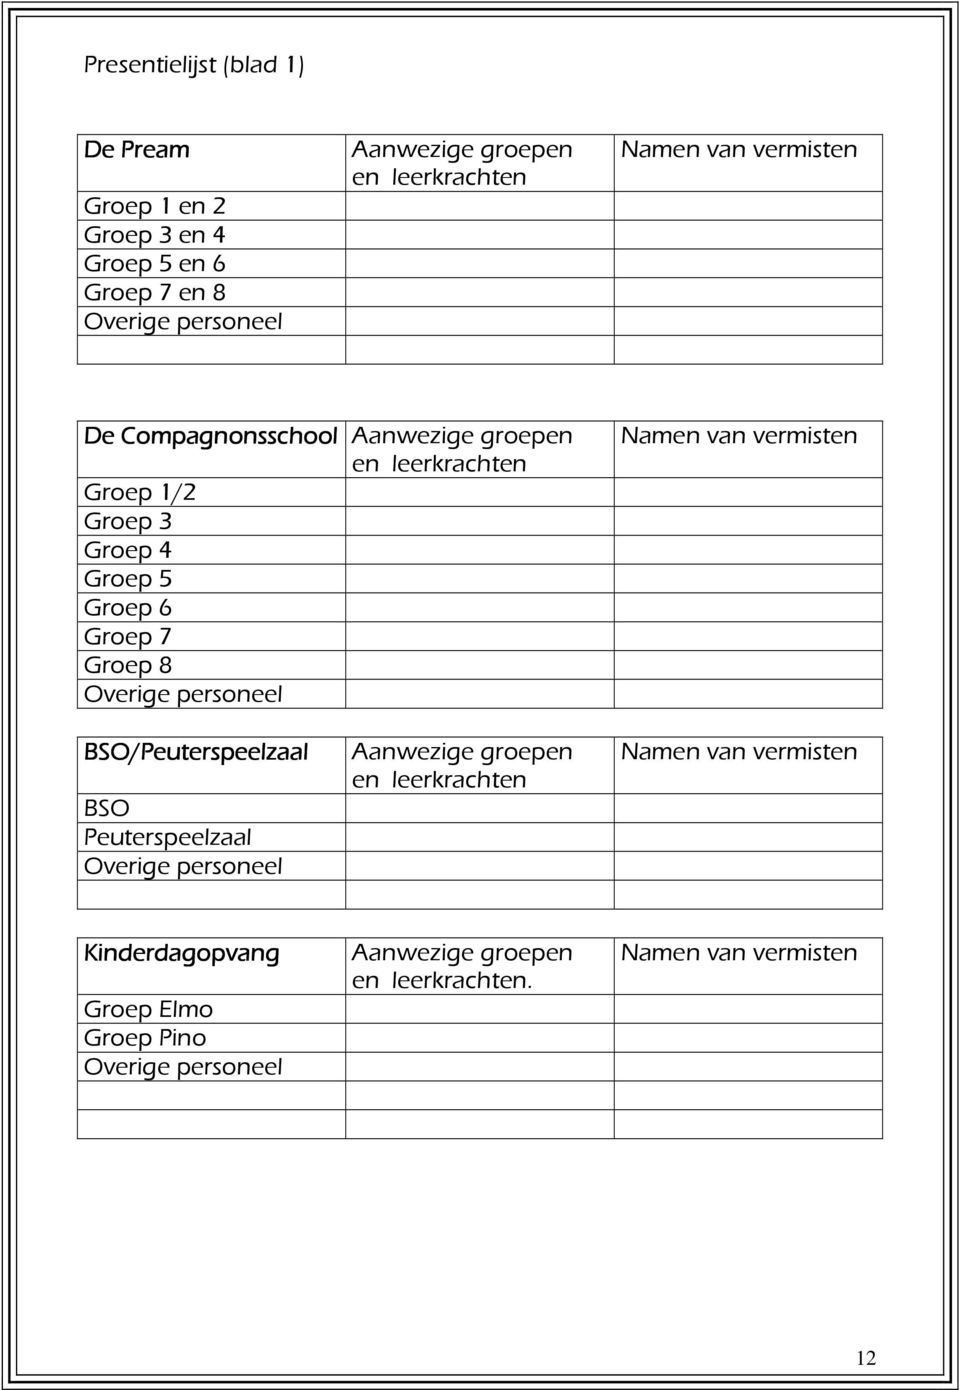 Groep 3 Groep 4 Groep 5 Groep 6 Groep 7 Groep 8 BSO/Peuterspeelzaal BSO